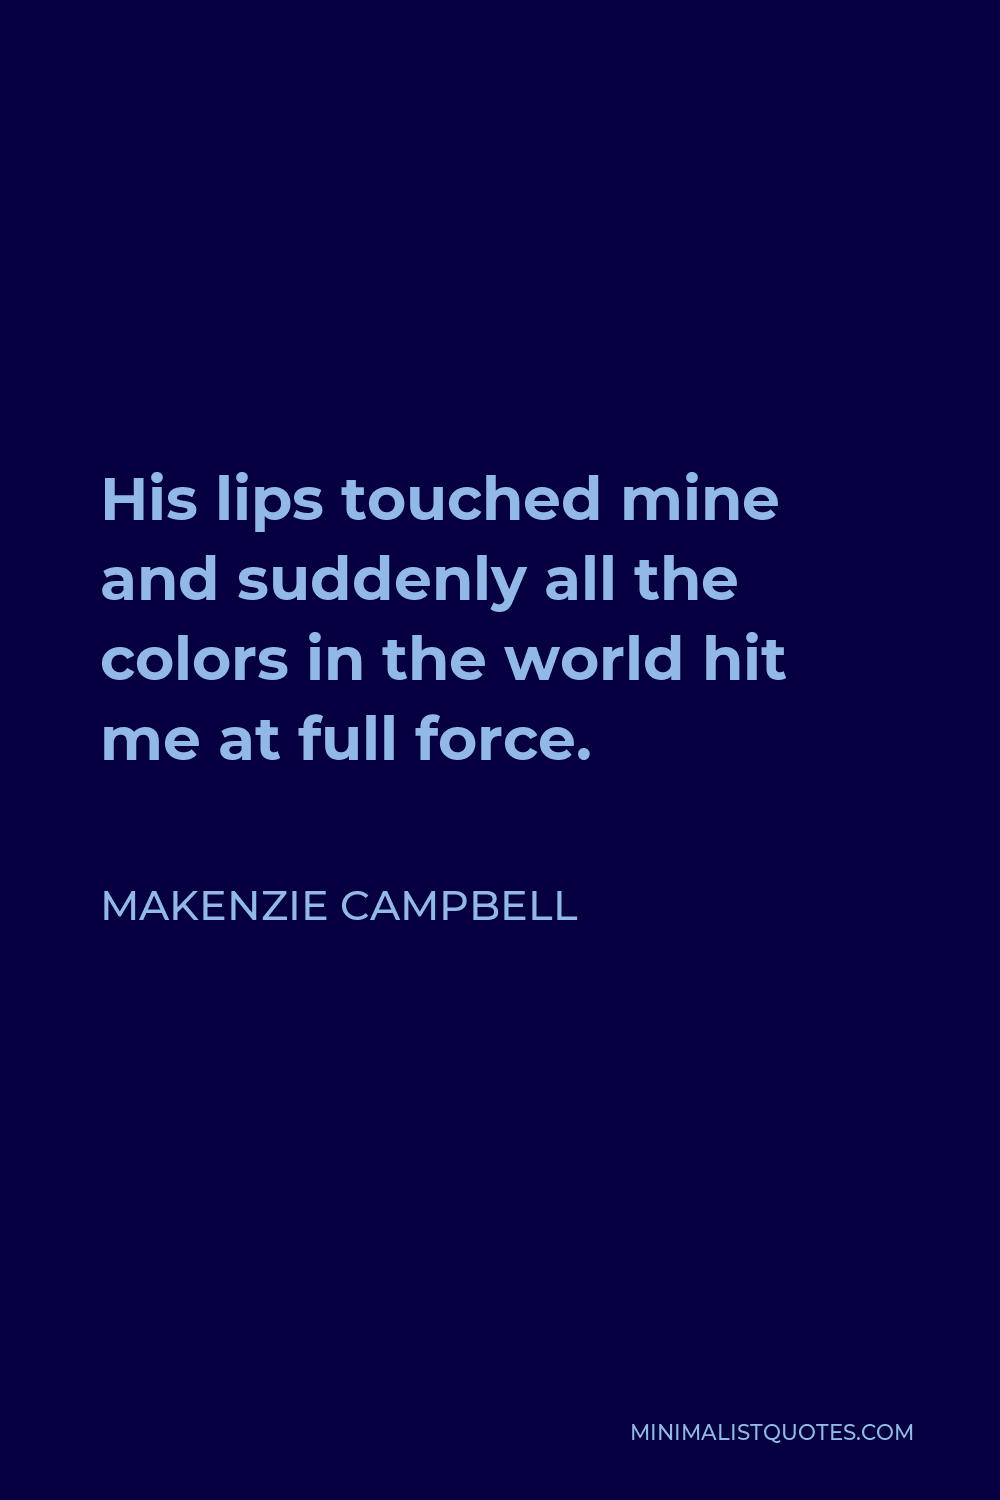 Makenzie Campbell Quote - His lips touched mine and suddenly all the colors in the world hit me at full force.